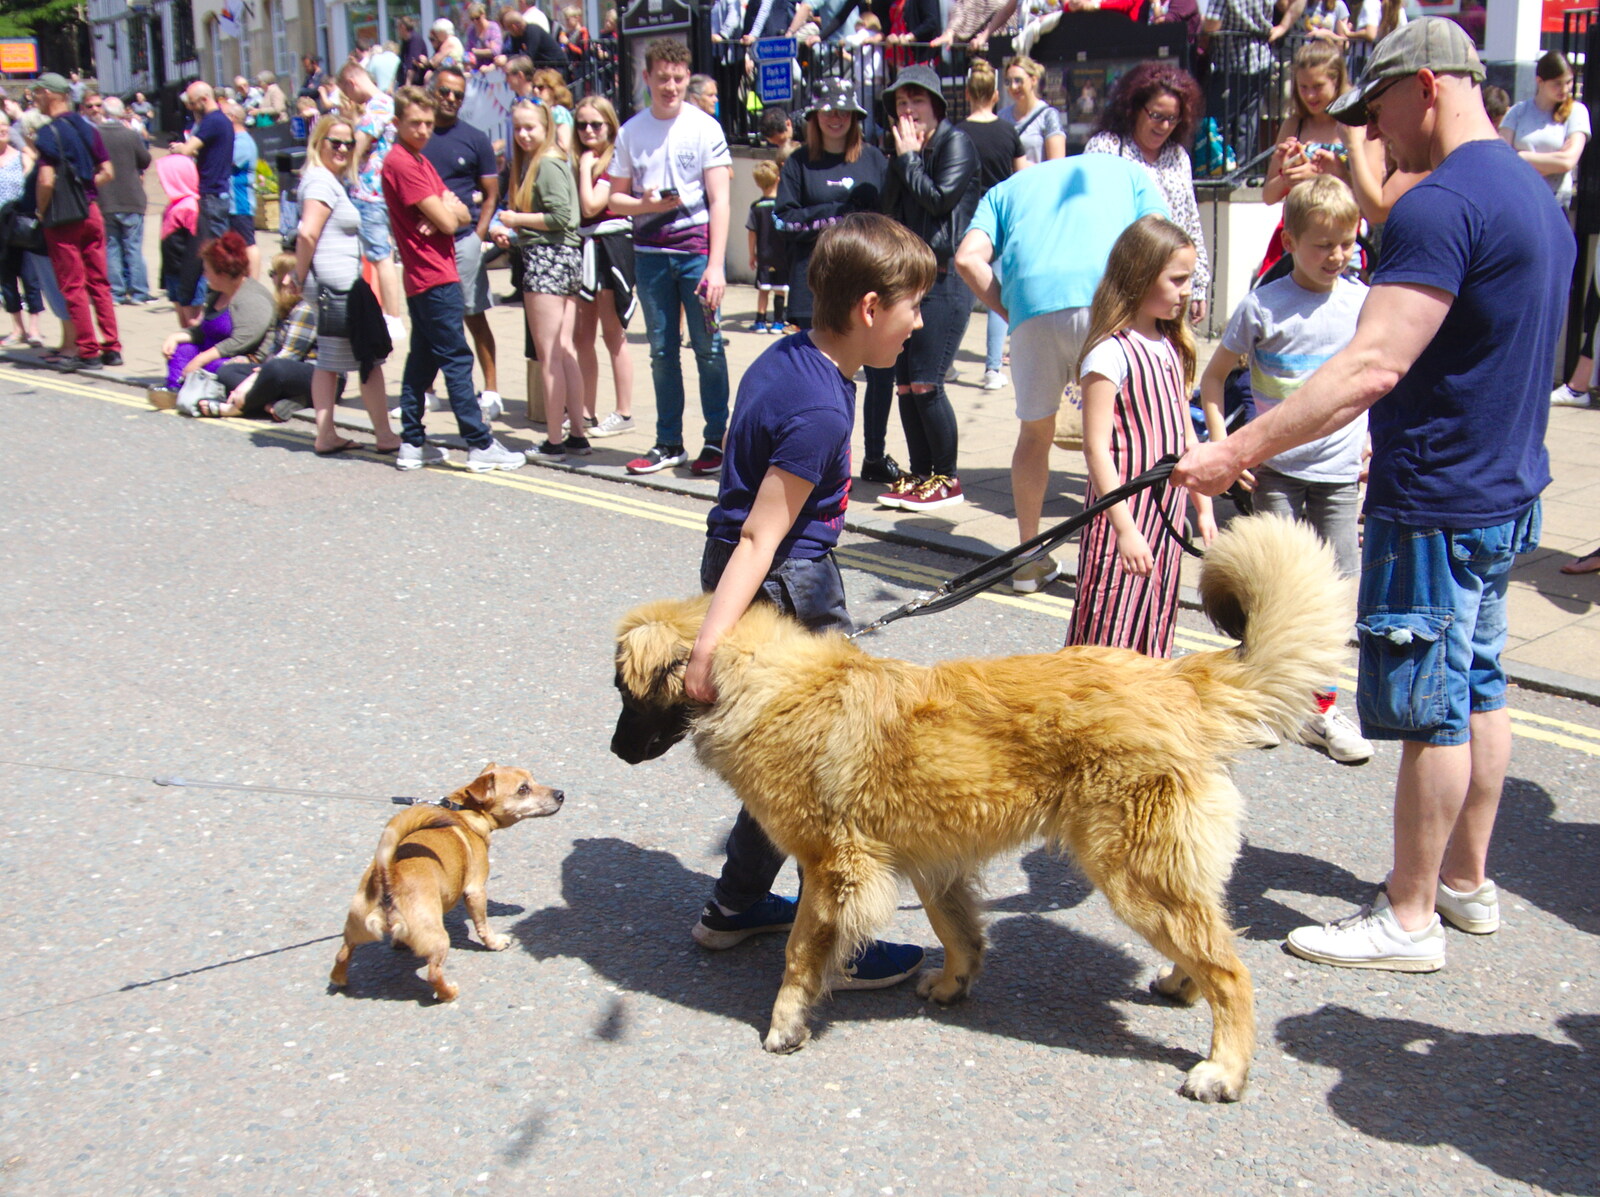 Little dog, big dog from The Diss Carnival 2019, Diss, Norfolk - 9th June 2019